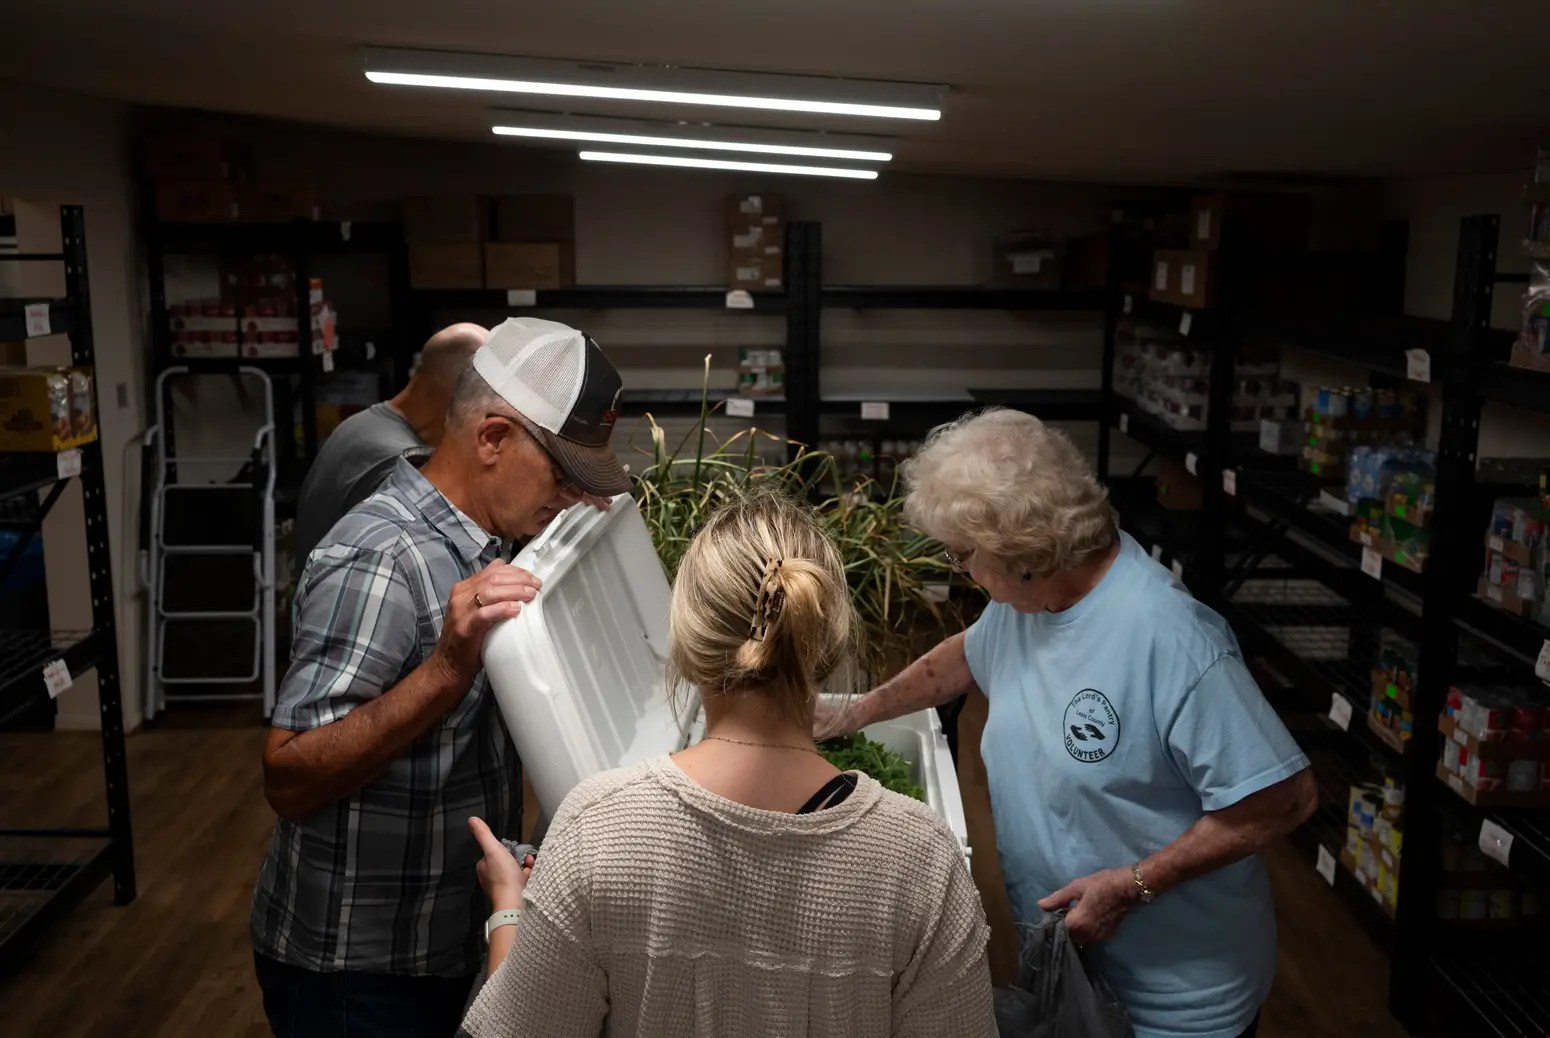 A group of people gather around an open box in a storage room.